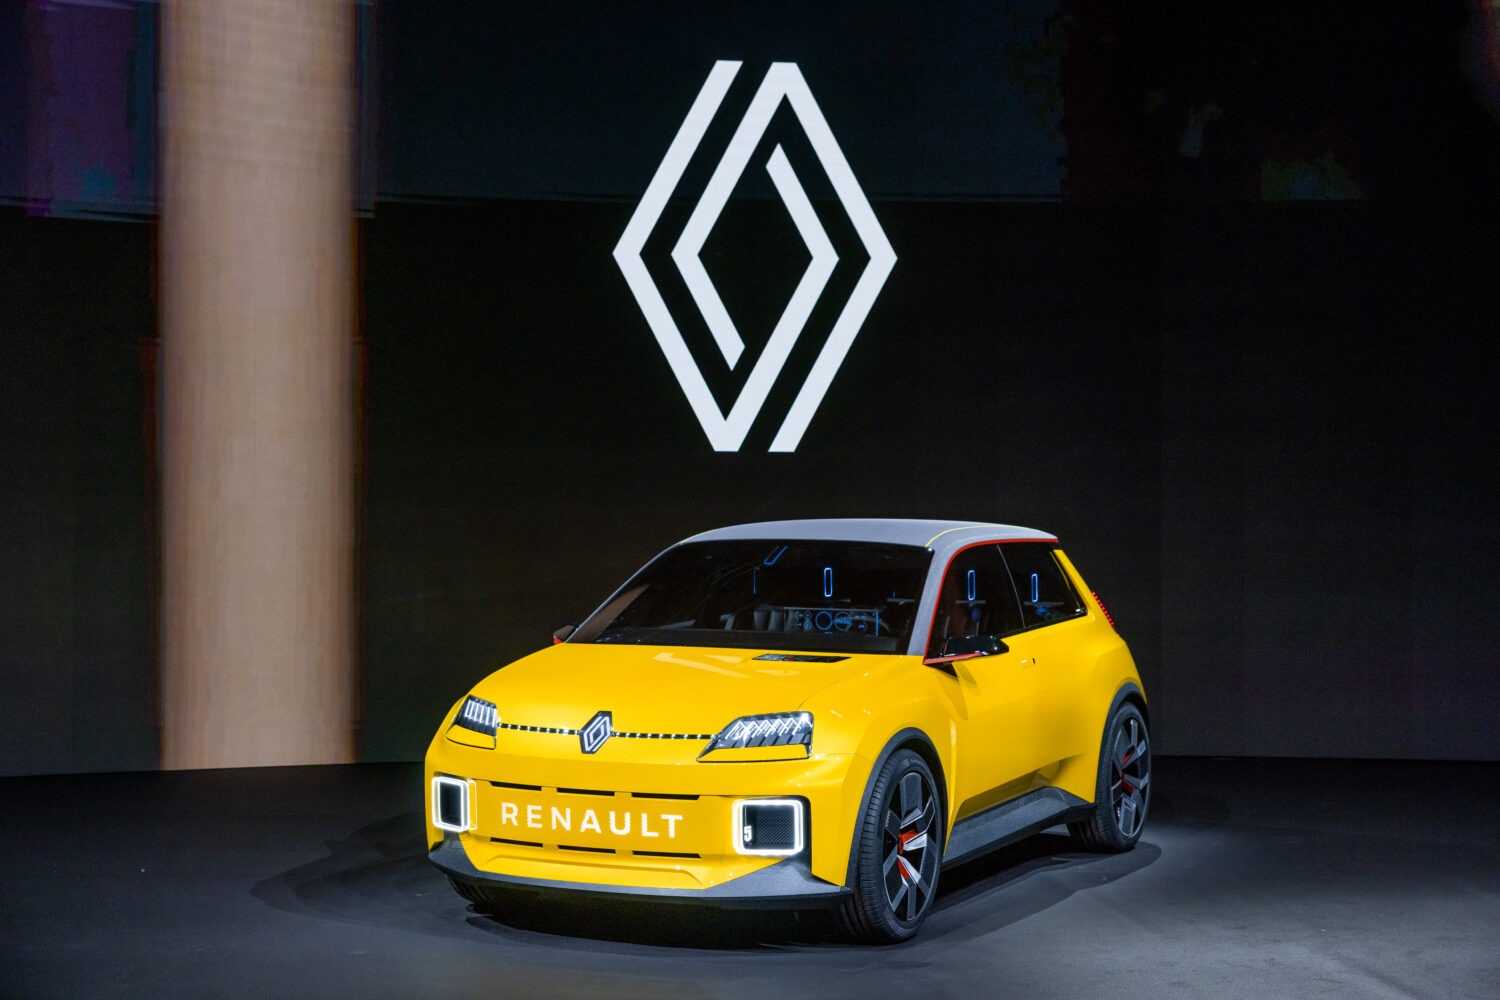 Reveal of the Groupe Renault strategic plan on January 14th, 2021